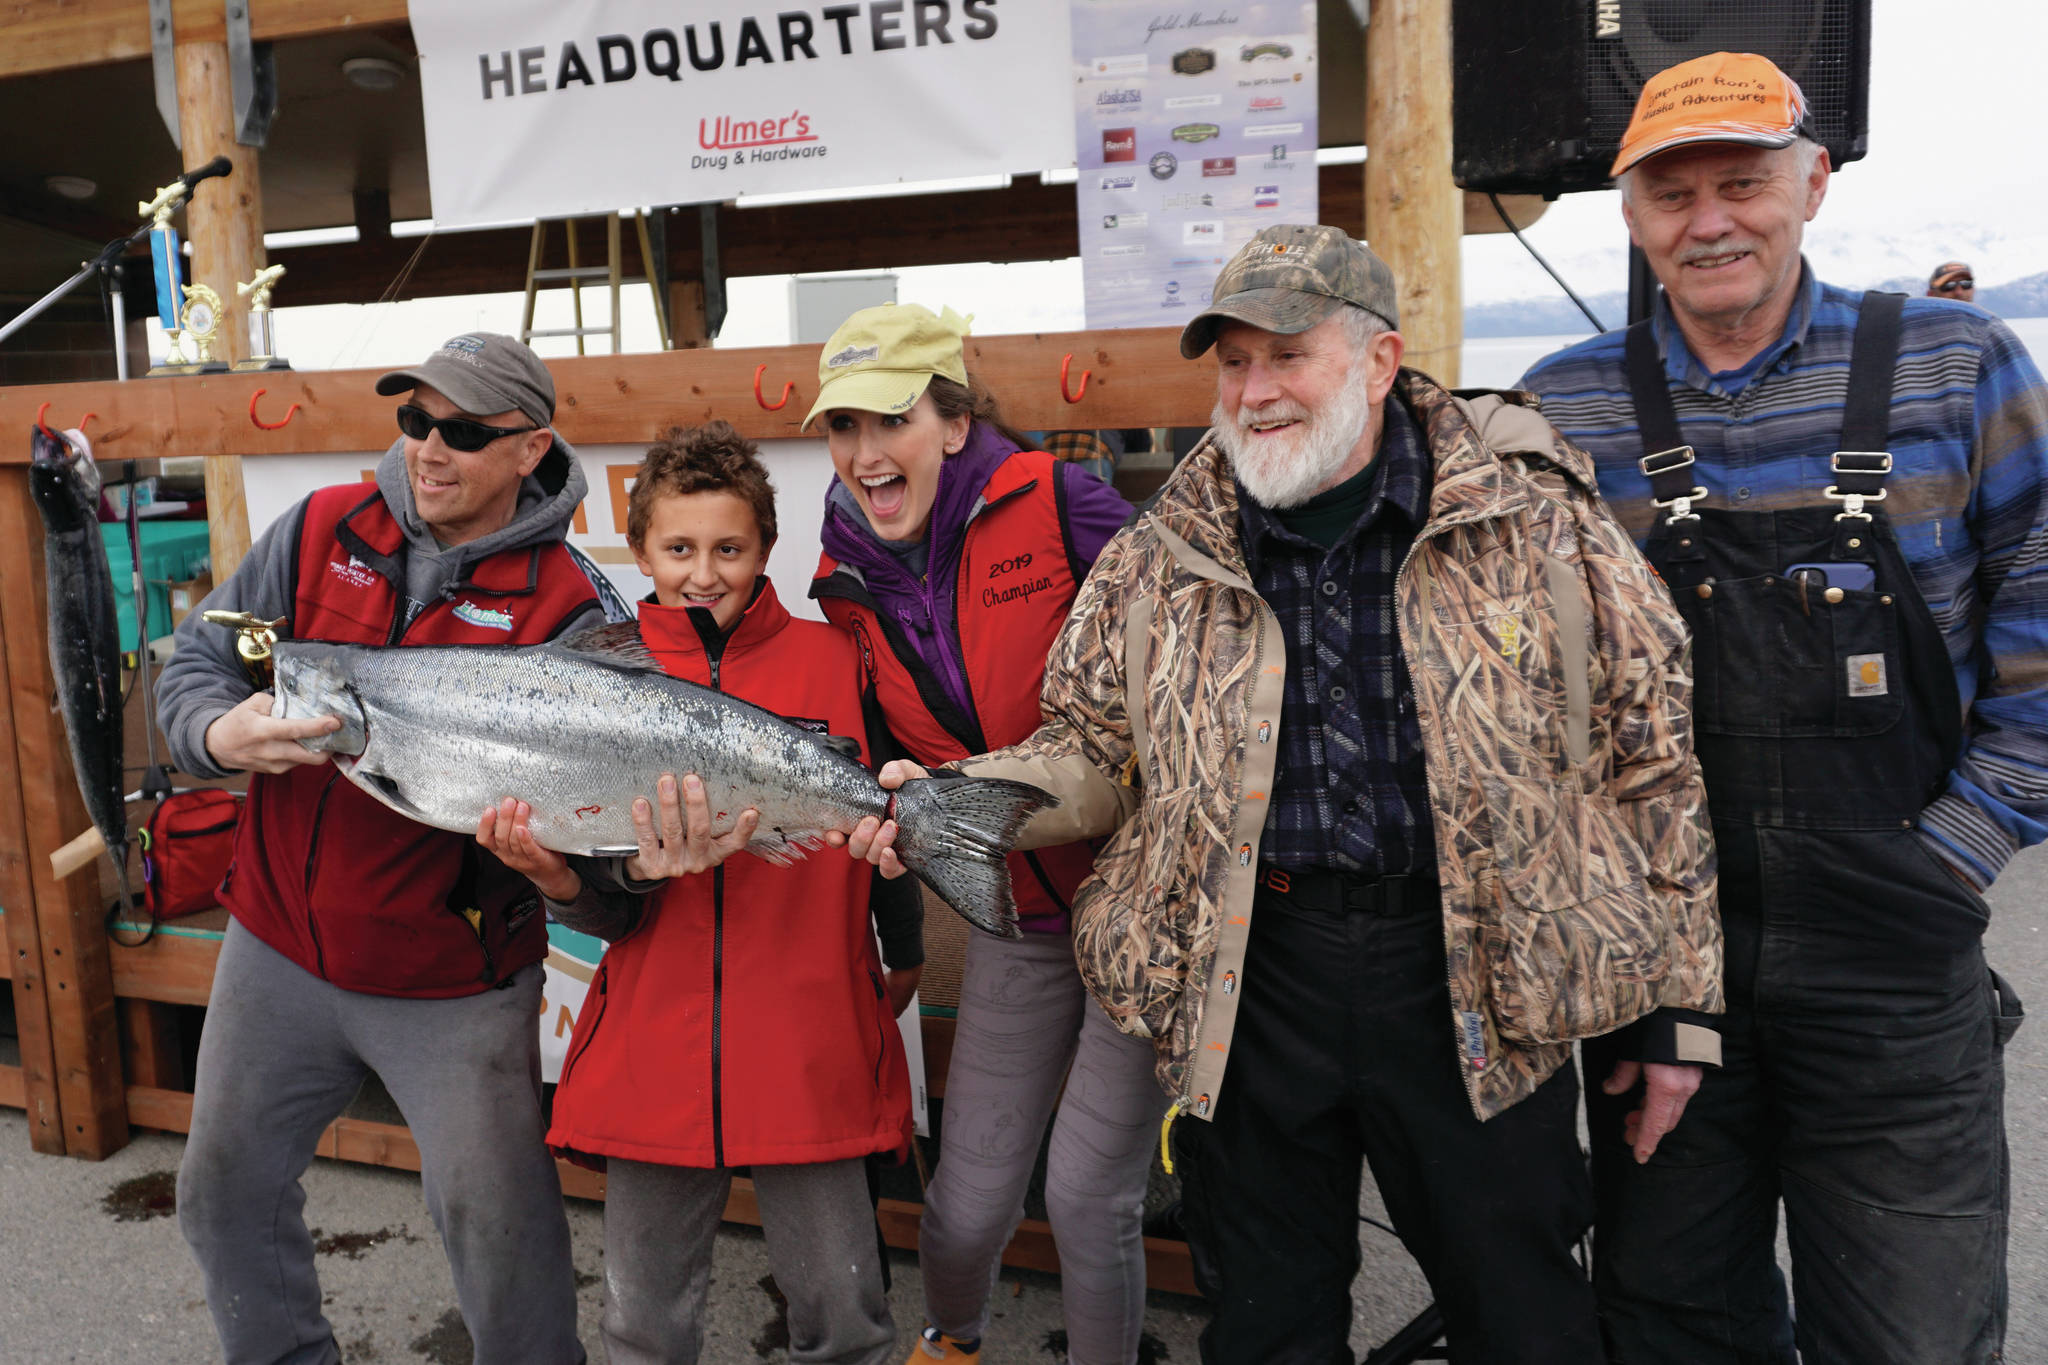 Andrew Marley, the 2021 Homer Winter King Salmon Tournament winner, second from left, is joined by previous winners on Saturday, April 17, 2021, on the Homer Spit in Homer, Alaska. From left to right are Mike Olson, 2015 winner, and no. 8 in 2021; Marley; Shana Perry, 2019 winner; Charlie Edwards, 2018 winner; and Ron Johnson, 2017 winner. (Photo by Michael Armstrong/Homer News)